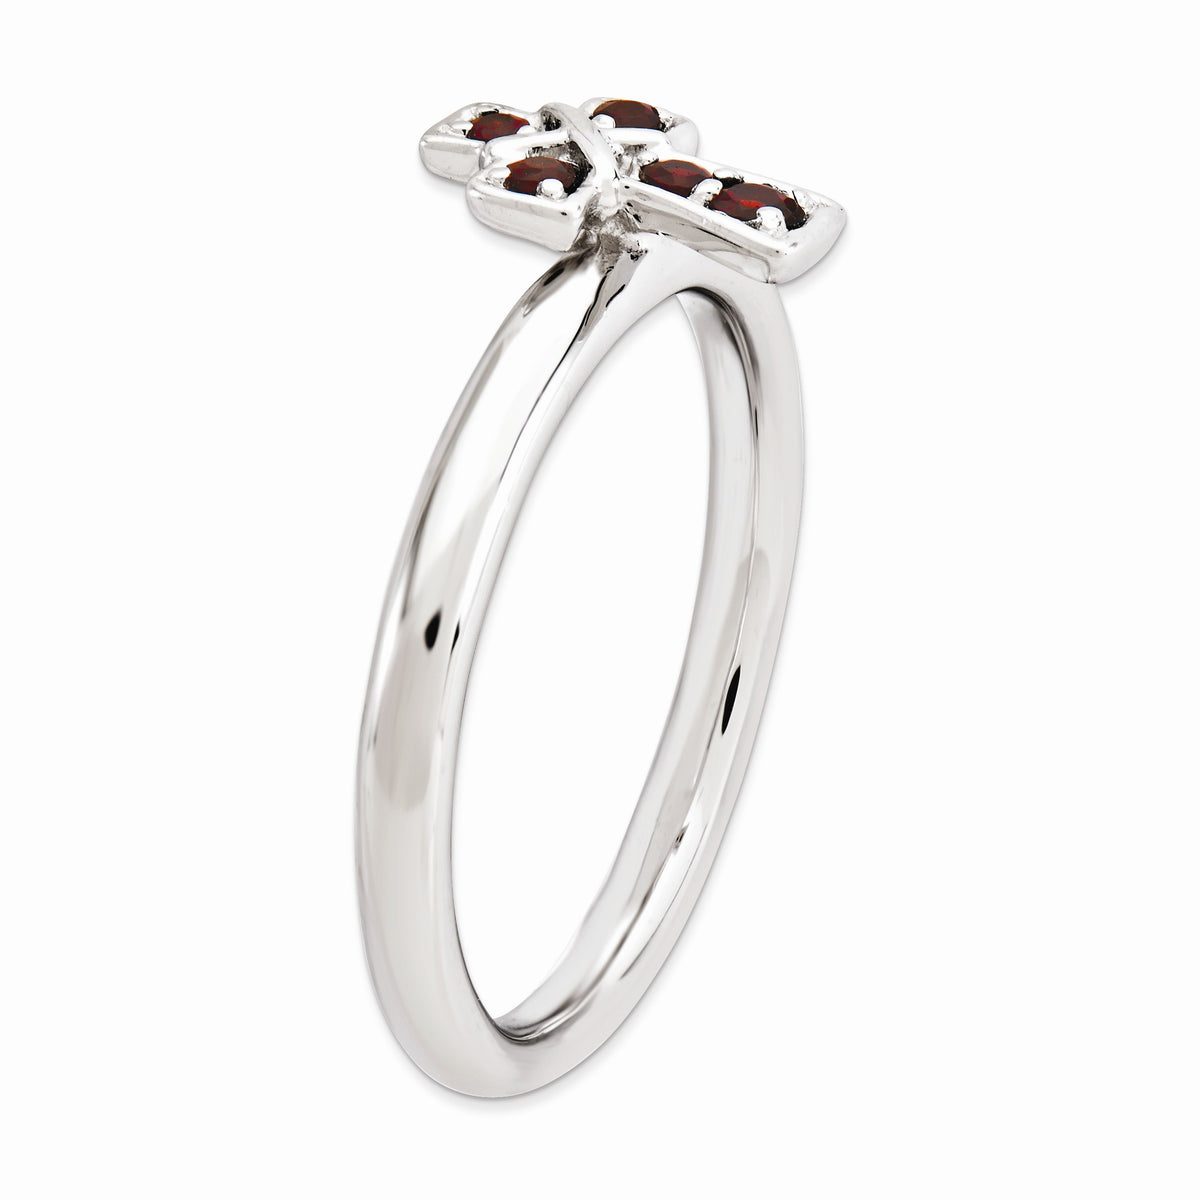 Alternate view of the Rhodium Plated Sterling Silver Stackable Garnet 9mm Cross Ring by The Black Bow Jewelry Co.